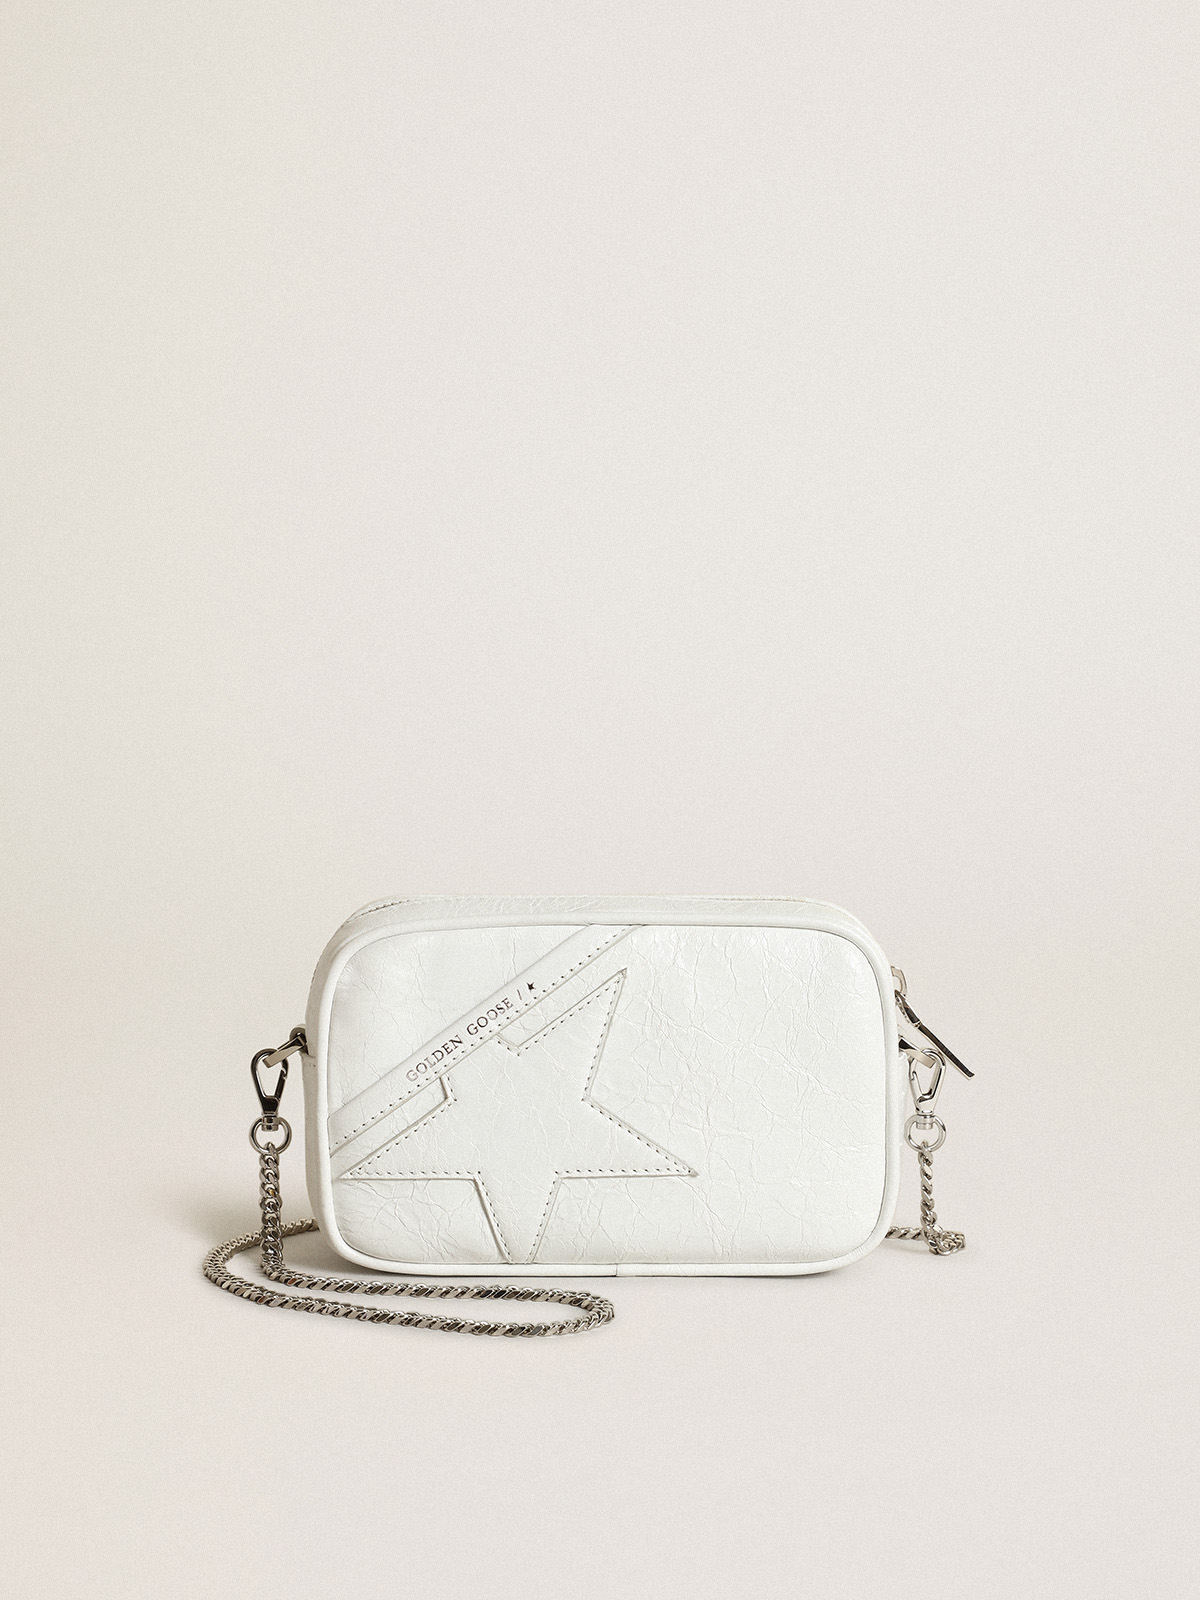 Women's Mini Star Bag in white glossy leather with tone-on-tone star